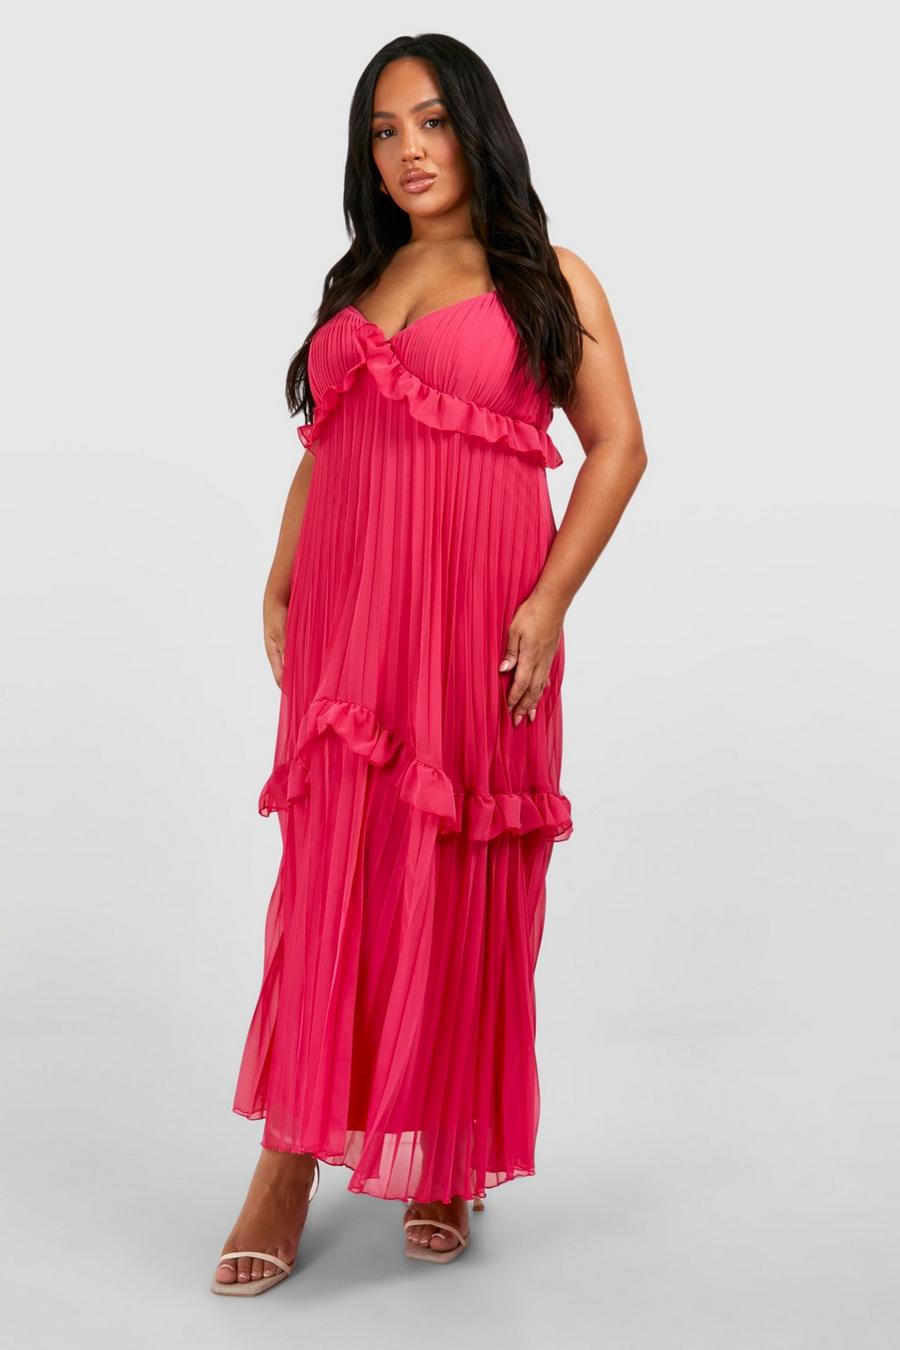 Grande taille - Robe mi-longue à manches larges, Hot pink